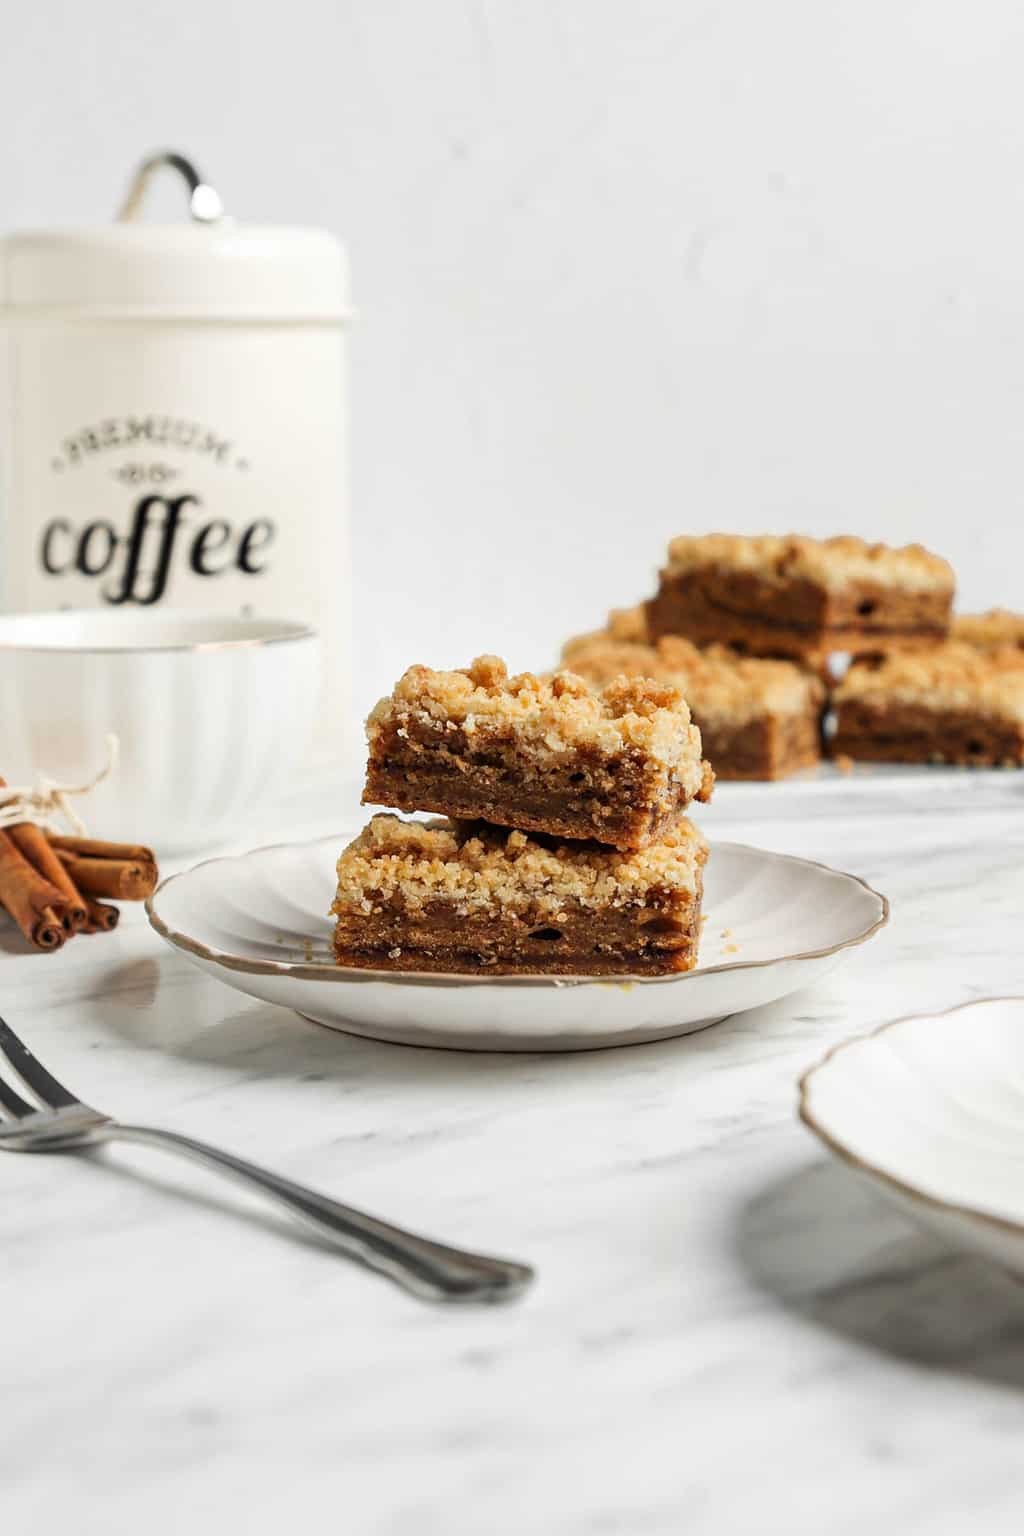 two slices of coffee cake on white plate